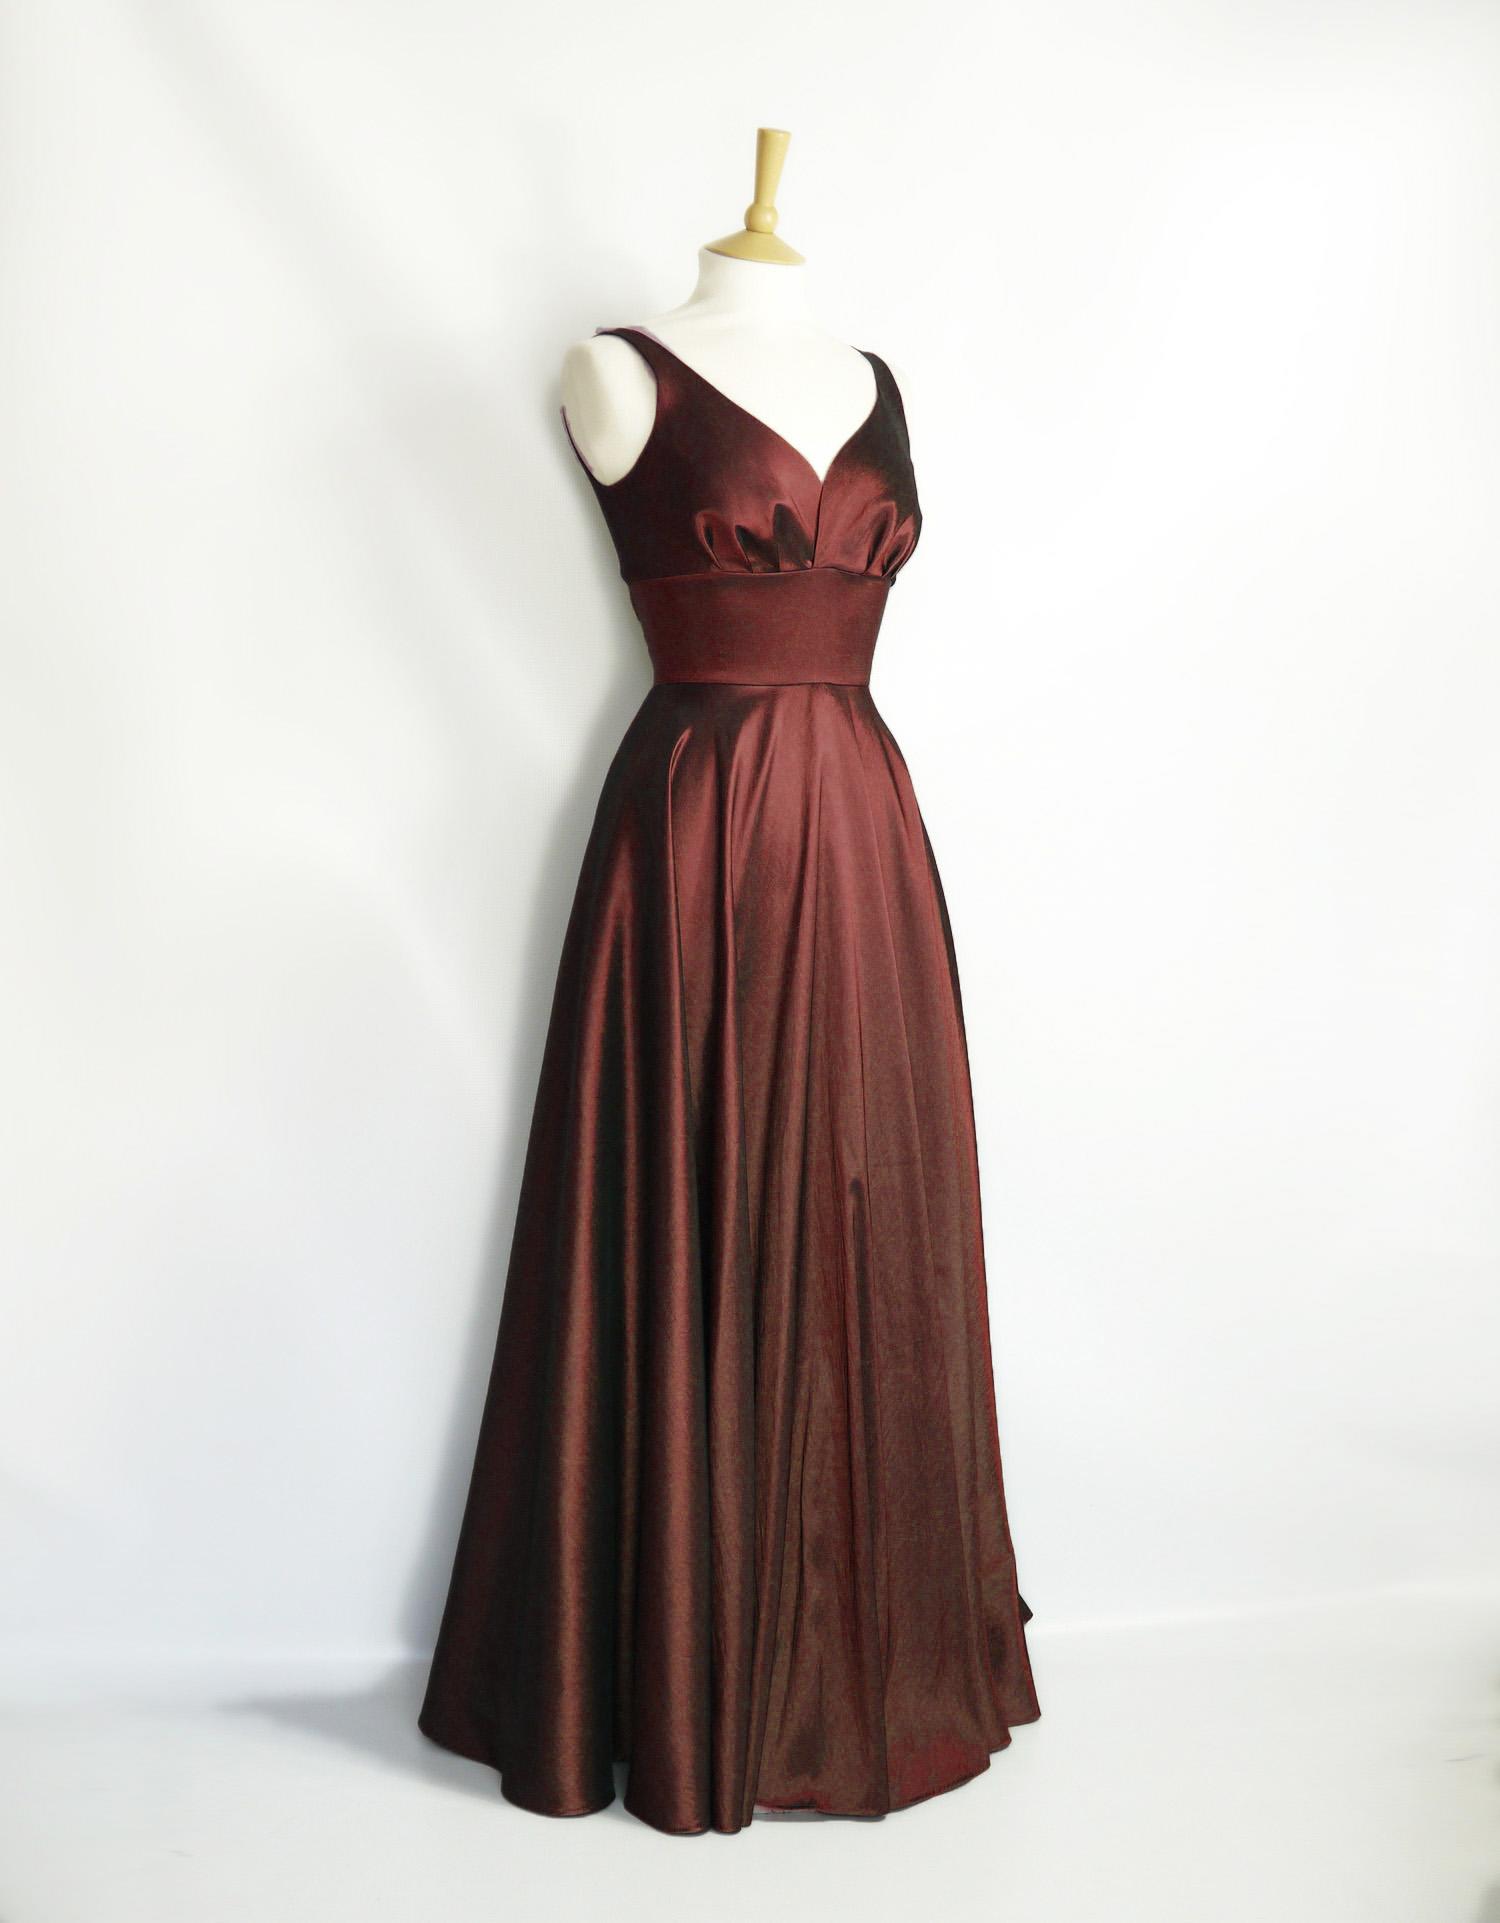 Olive Green Taffeta 1950s Inspired Evening Gown